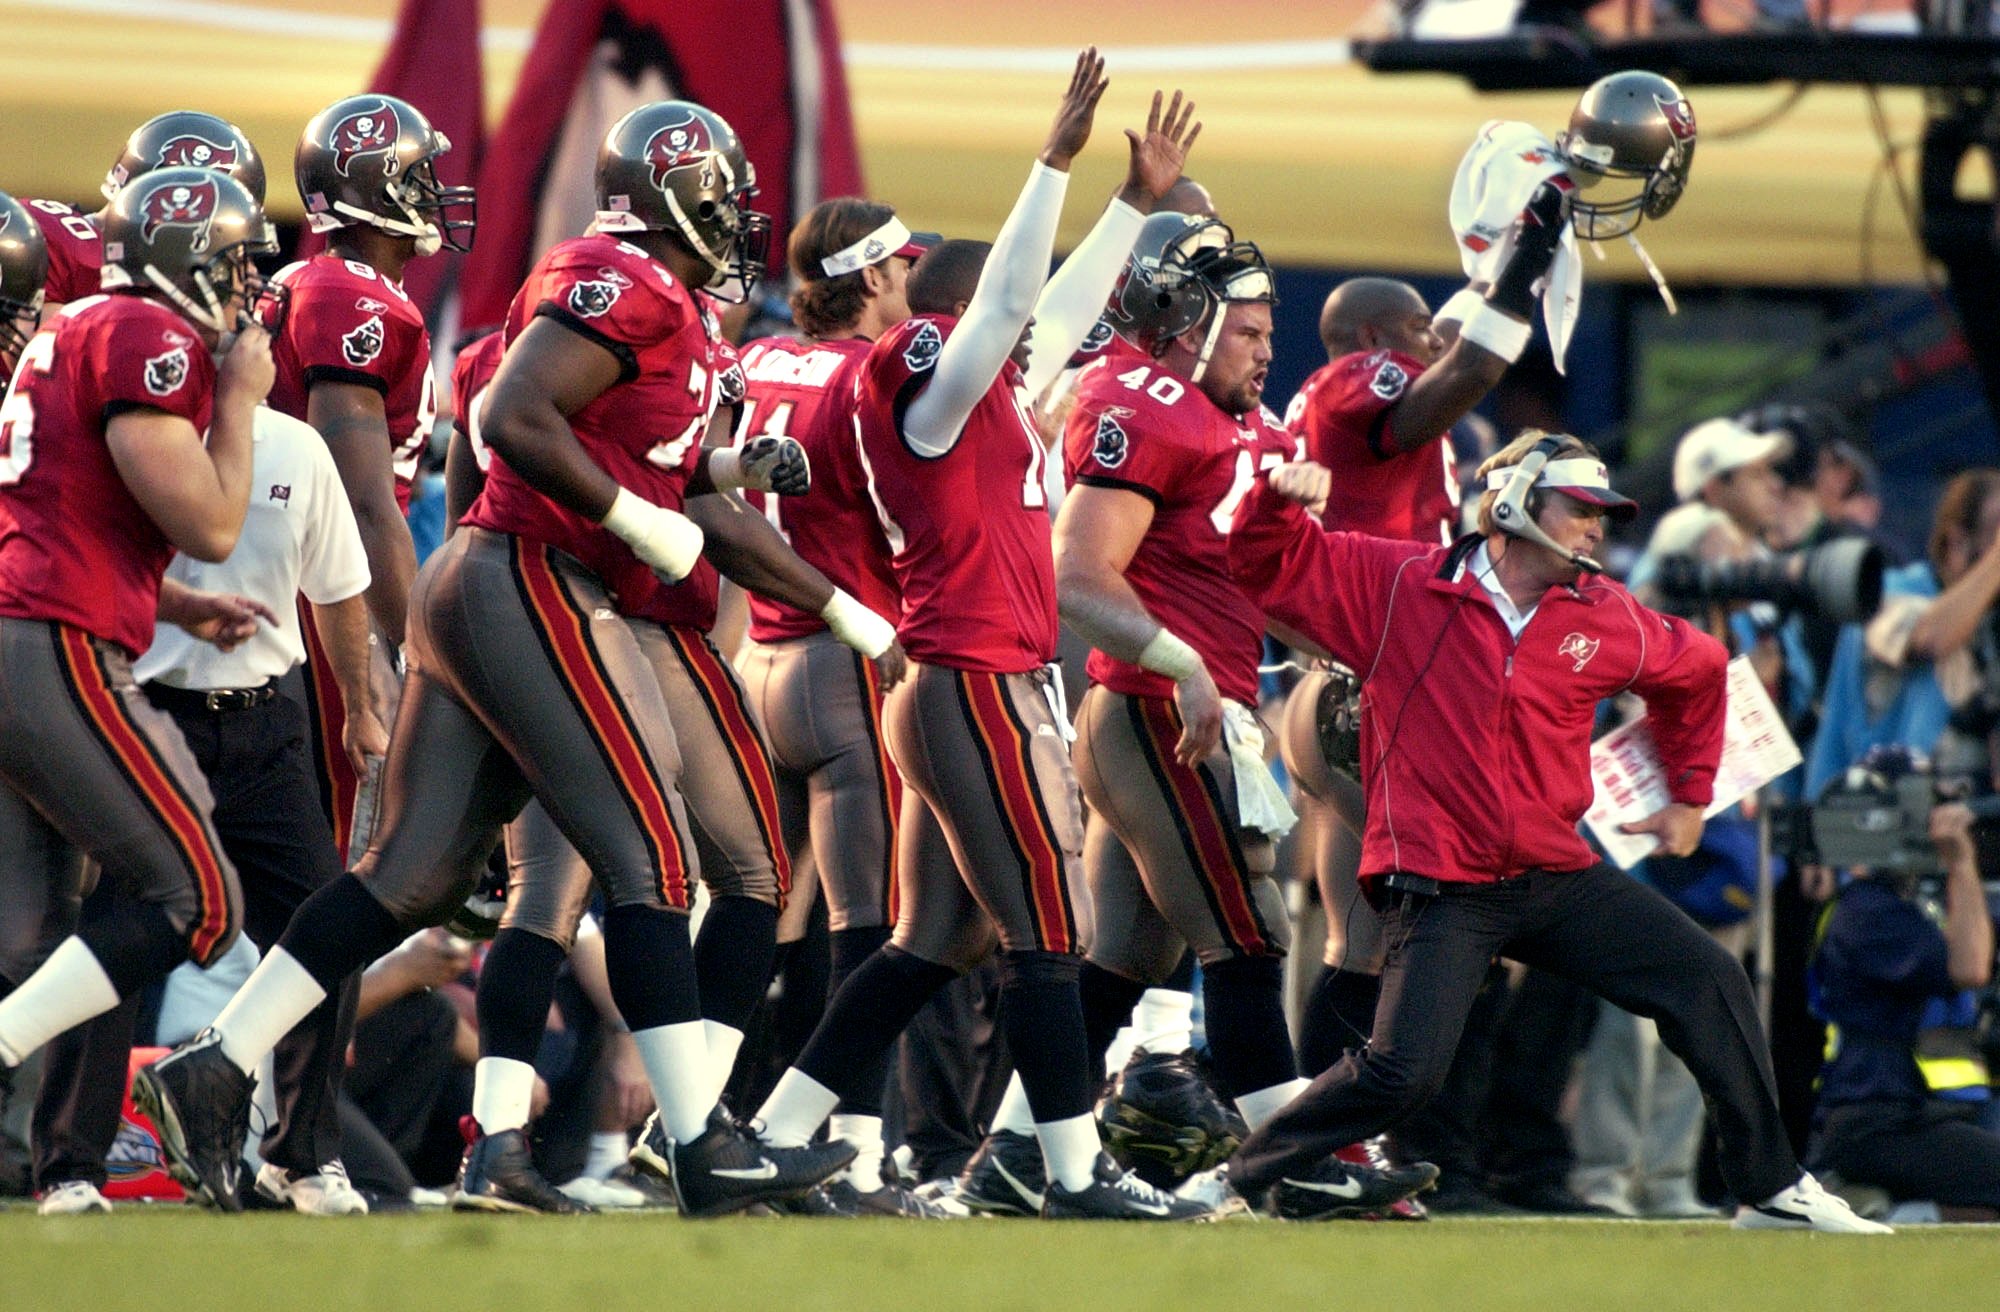 Bucs Defeat Raiders 48-21 in Super Bowl XXXVII on January 26, 2003 - CLICK  TO WATCH ENTIRE GAME NOW